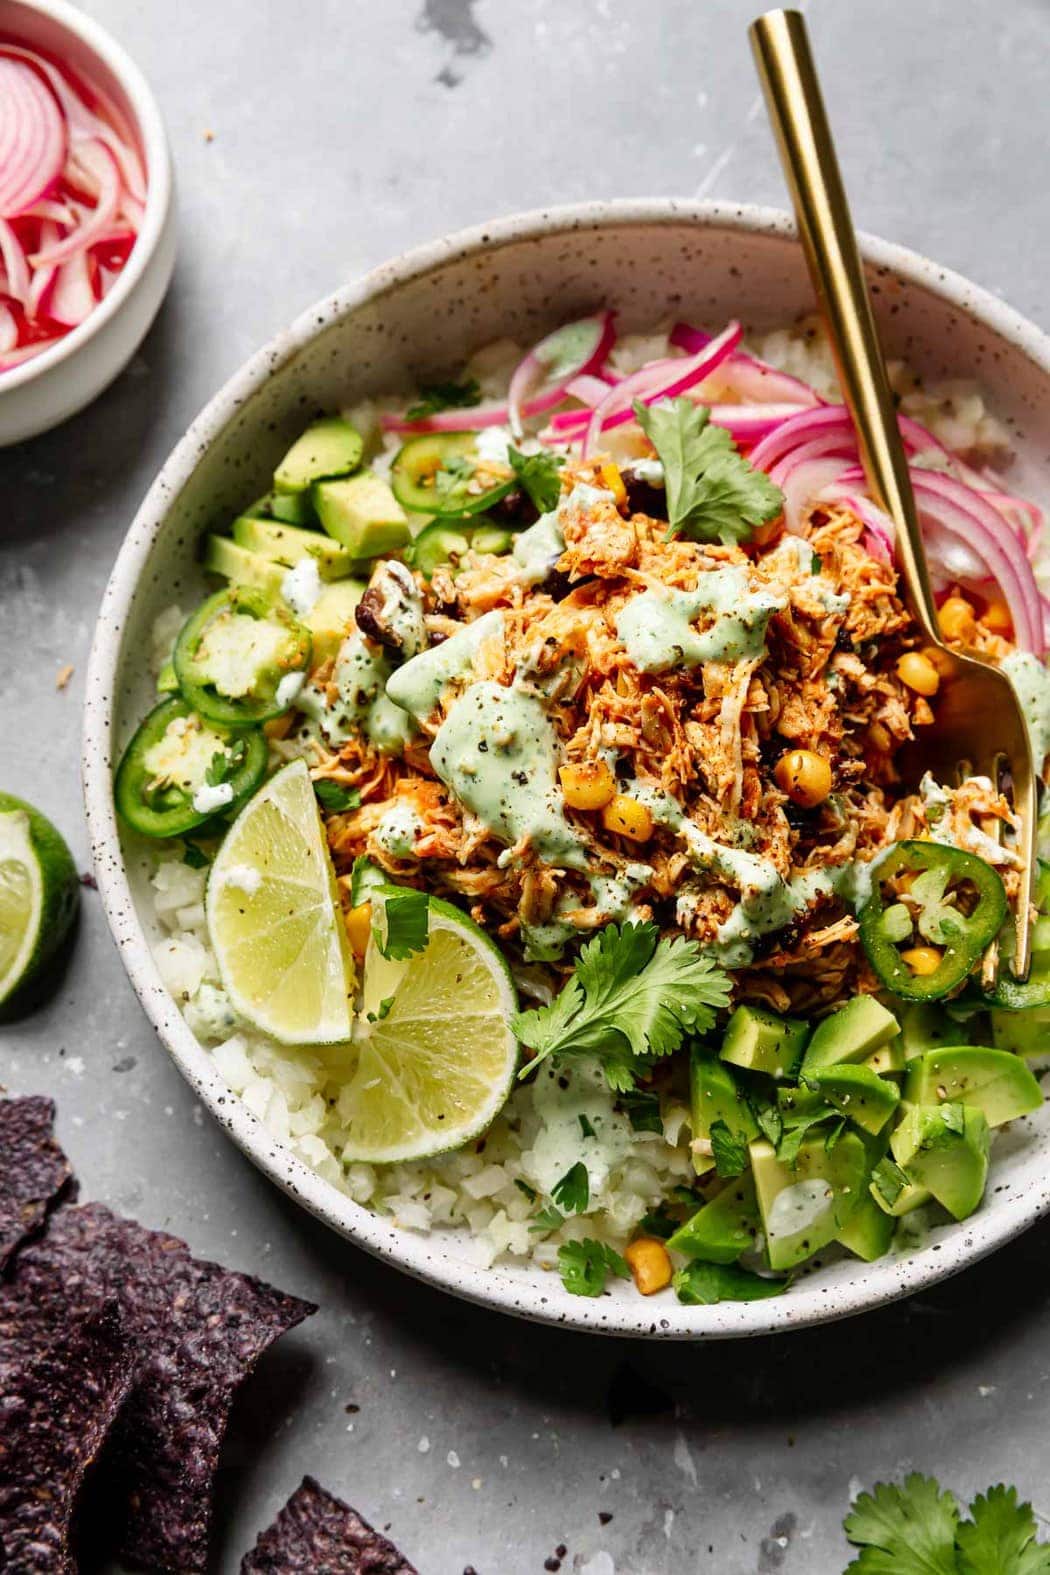 https://therealfooddietitians.com/wp-content/uploads/2021/05/Instant-Pot-Salsa-Chicken-Bowls-with-Cilantro-Lime-Crema-7.jpg